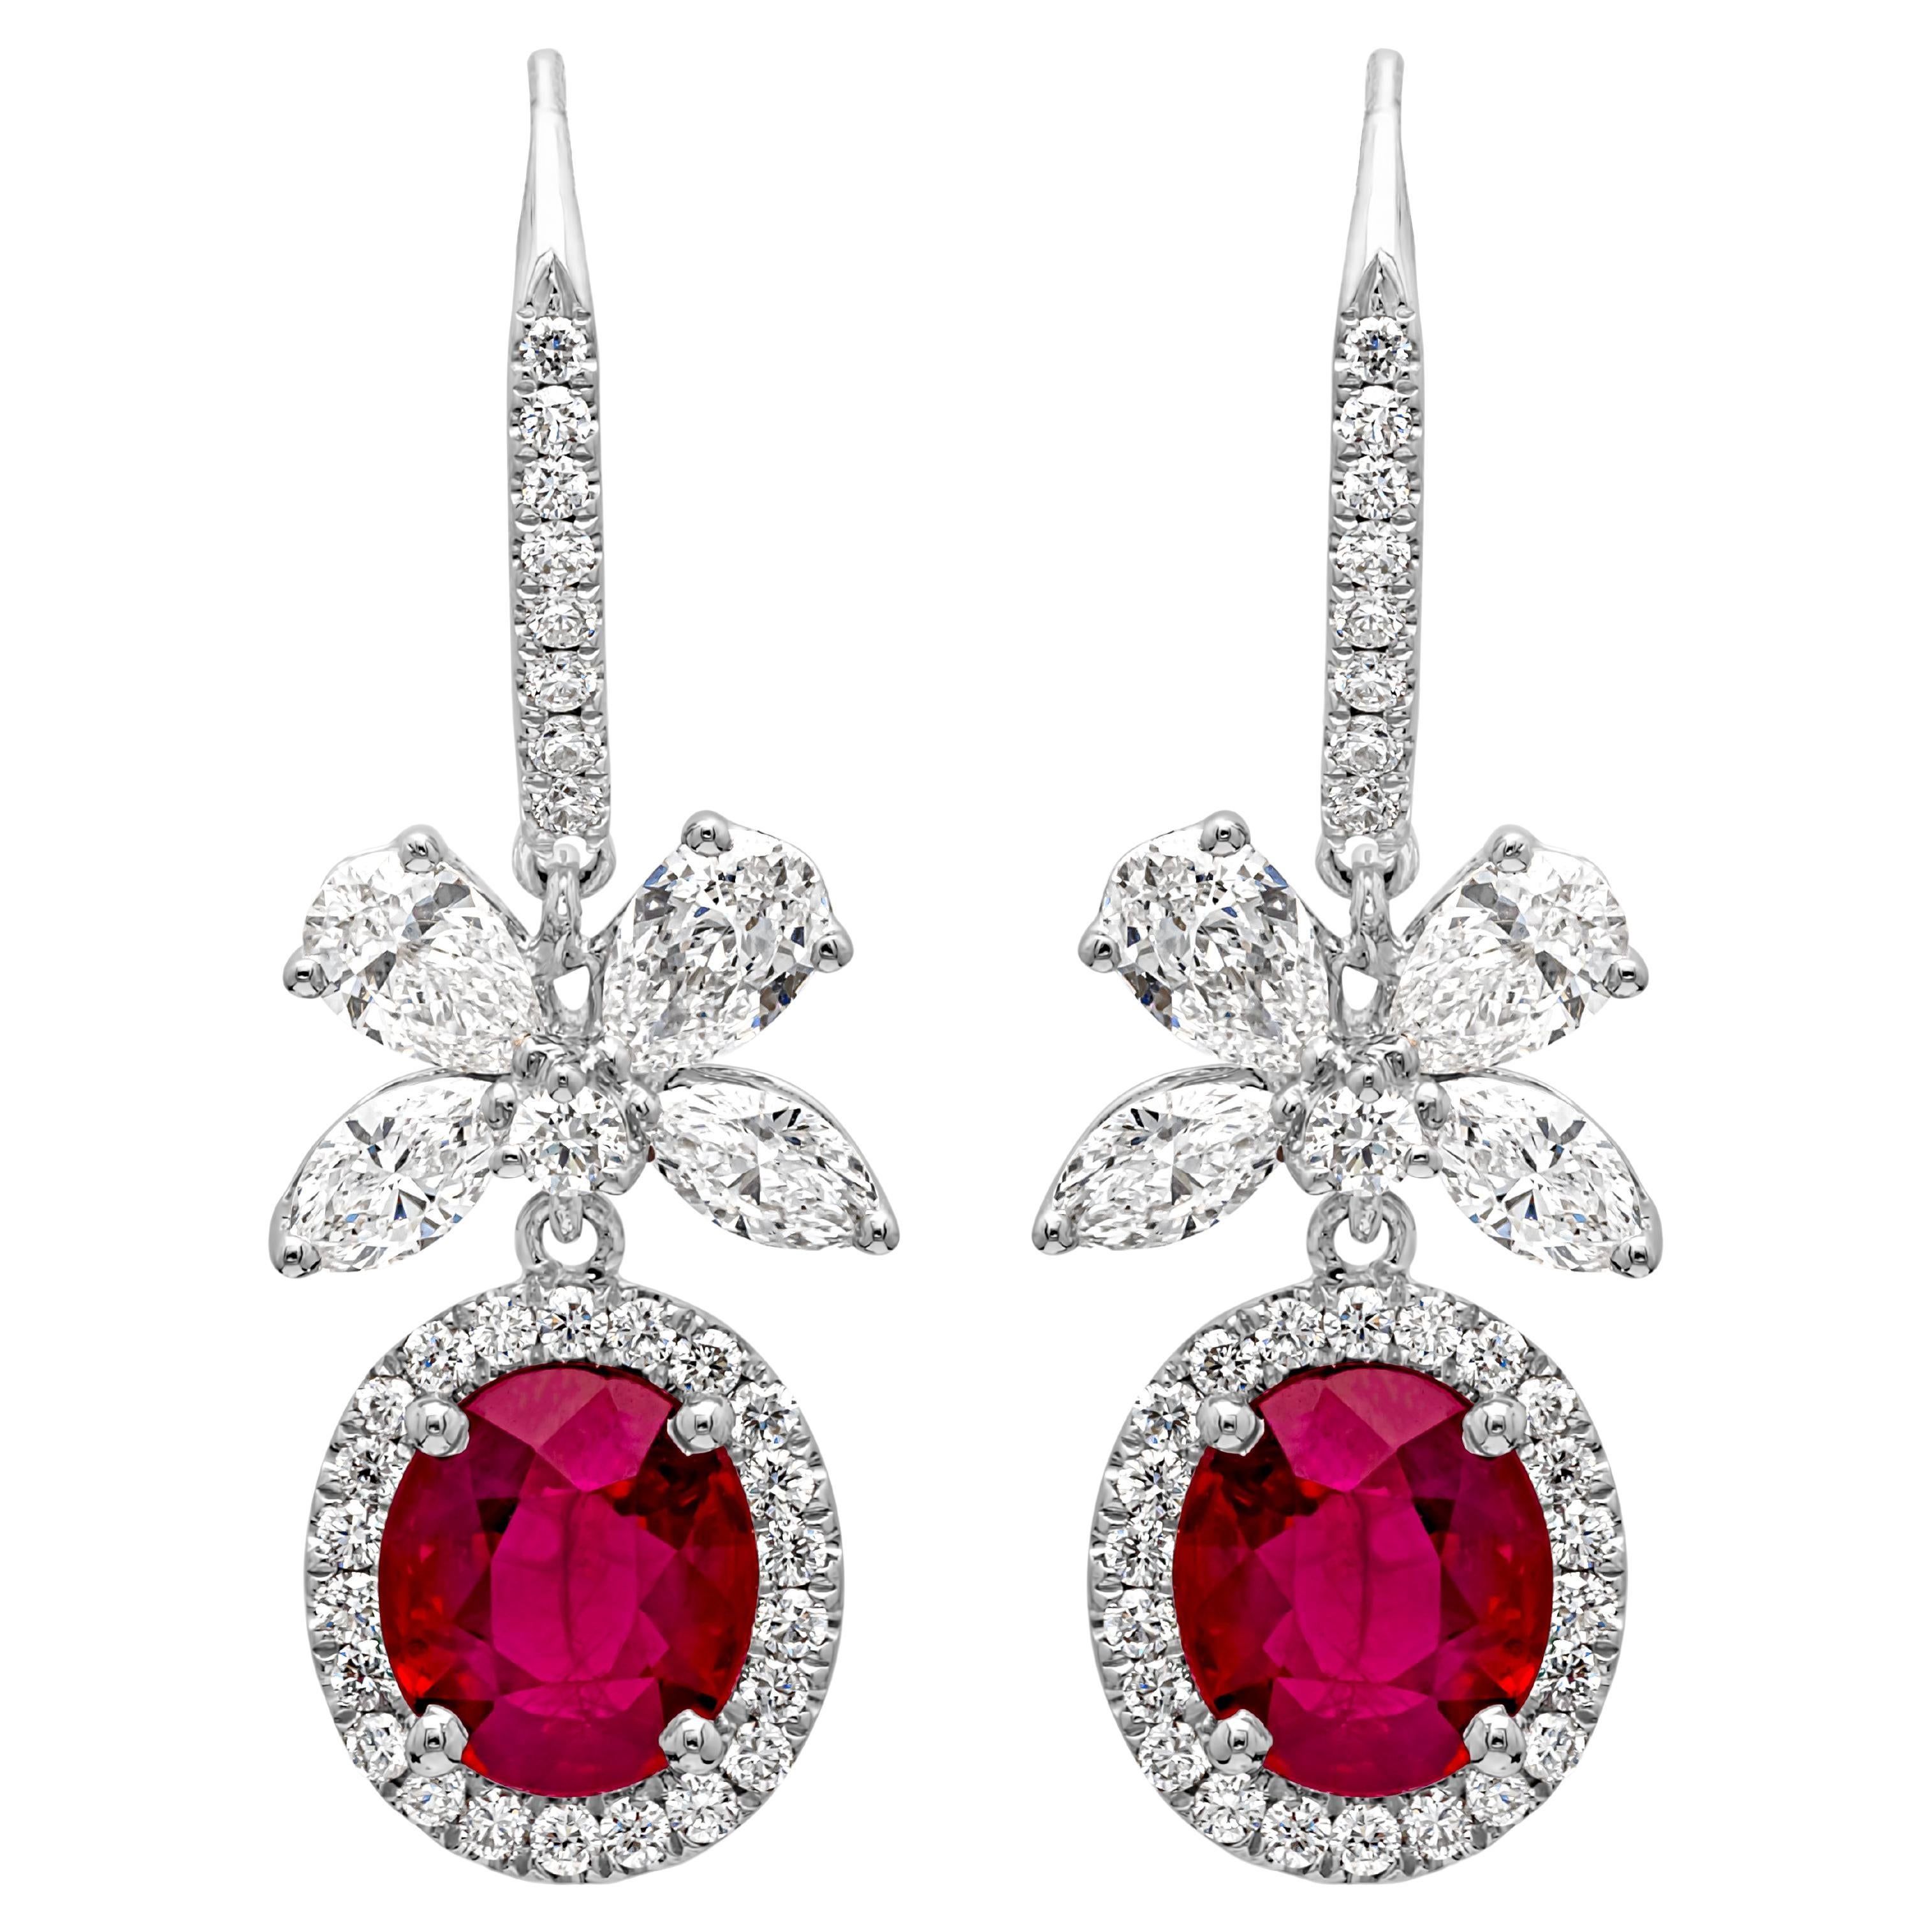 2.56 Carats Total Oval Cut Ruby and Mixed Cut Diamond Dangle Earrings